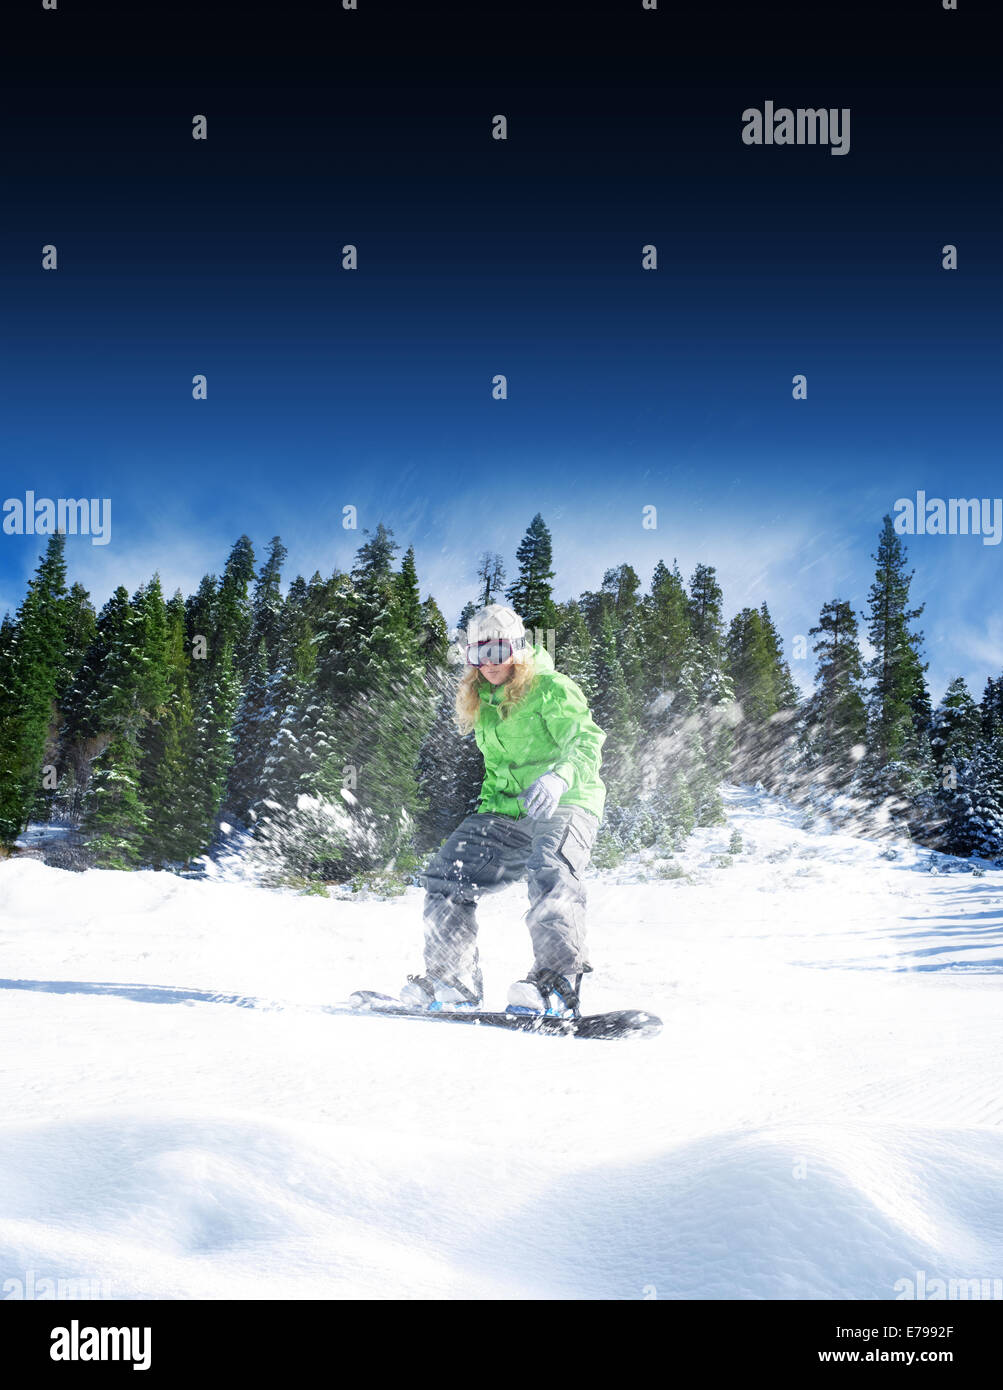 view of a young girl snowboarding in winter environment Stock Photo